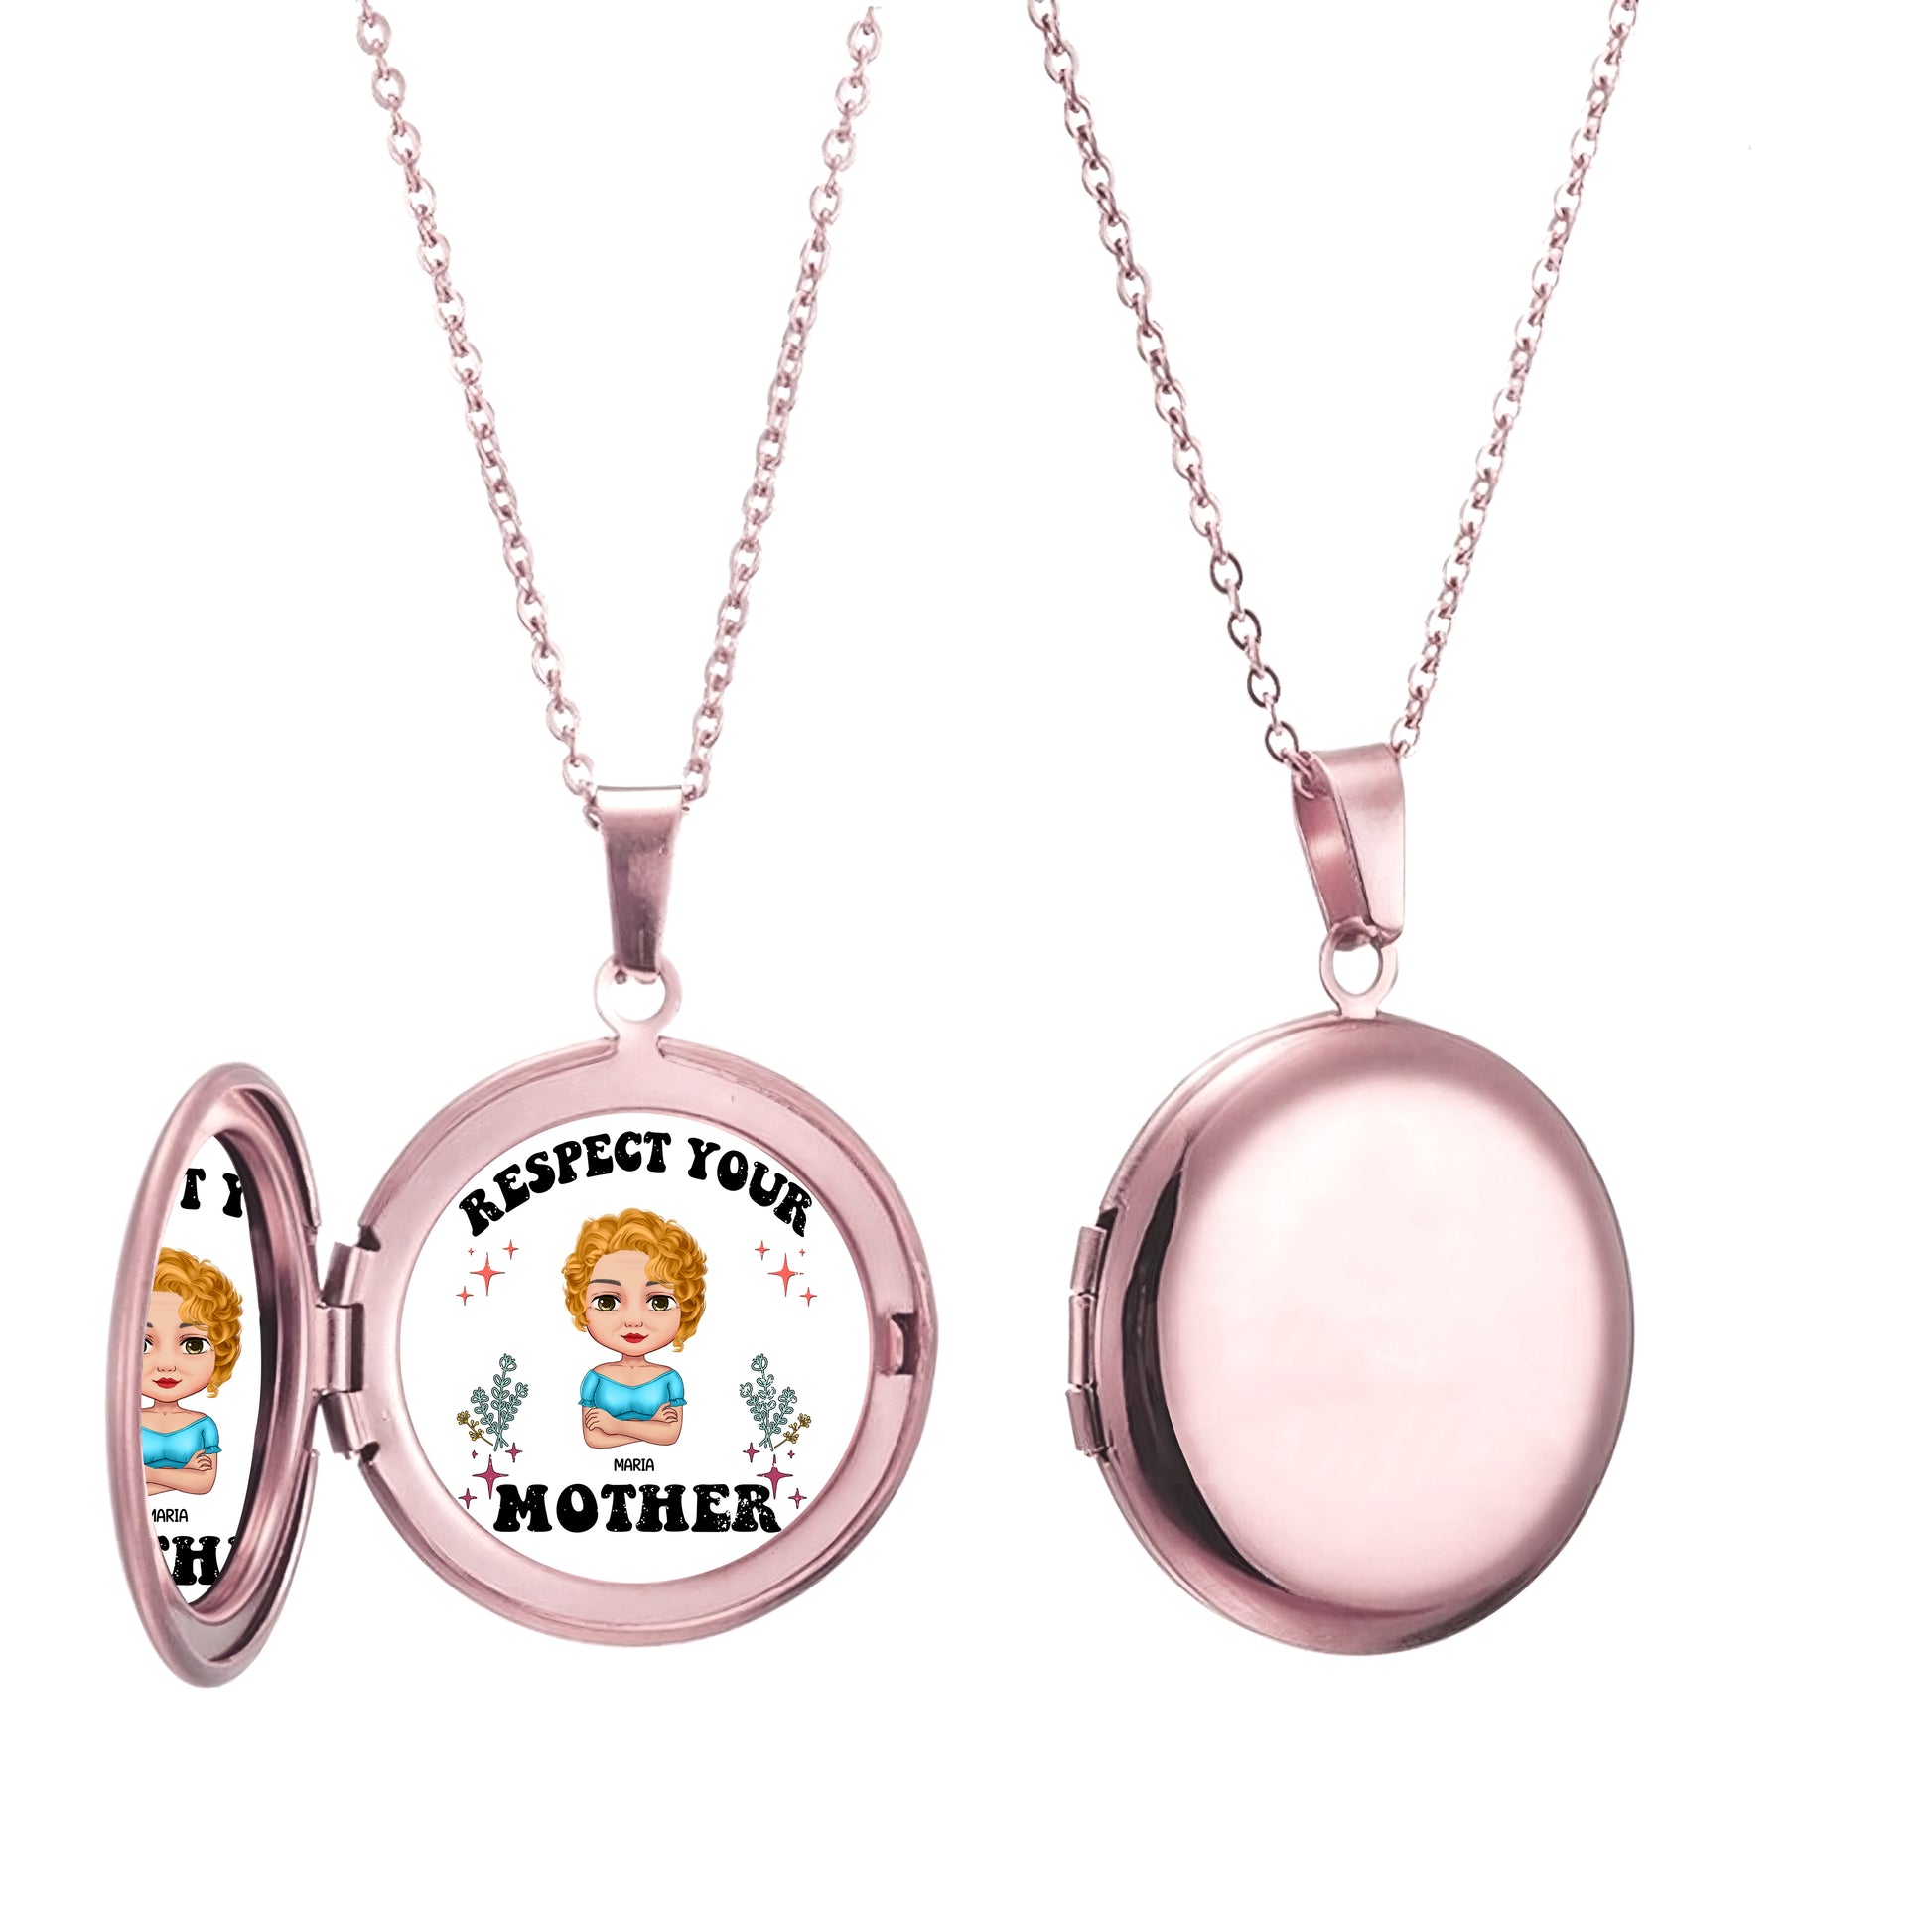 Respect Your Mother - Personalized Round Photo Locket Necklace - Gifts For Mother's Day